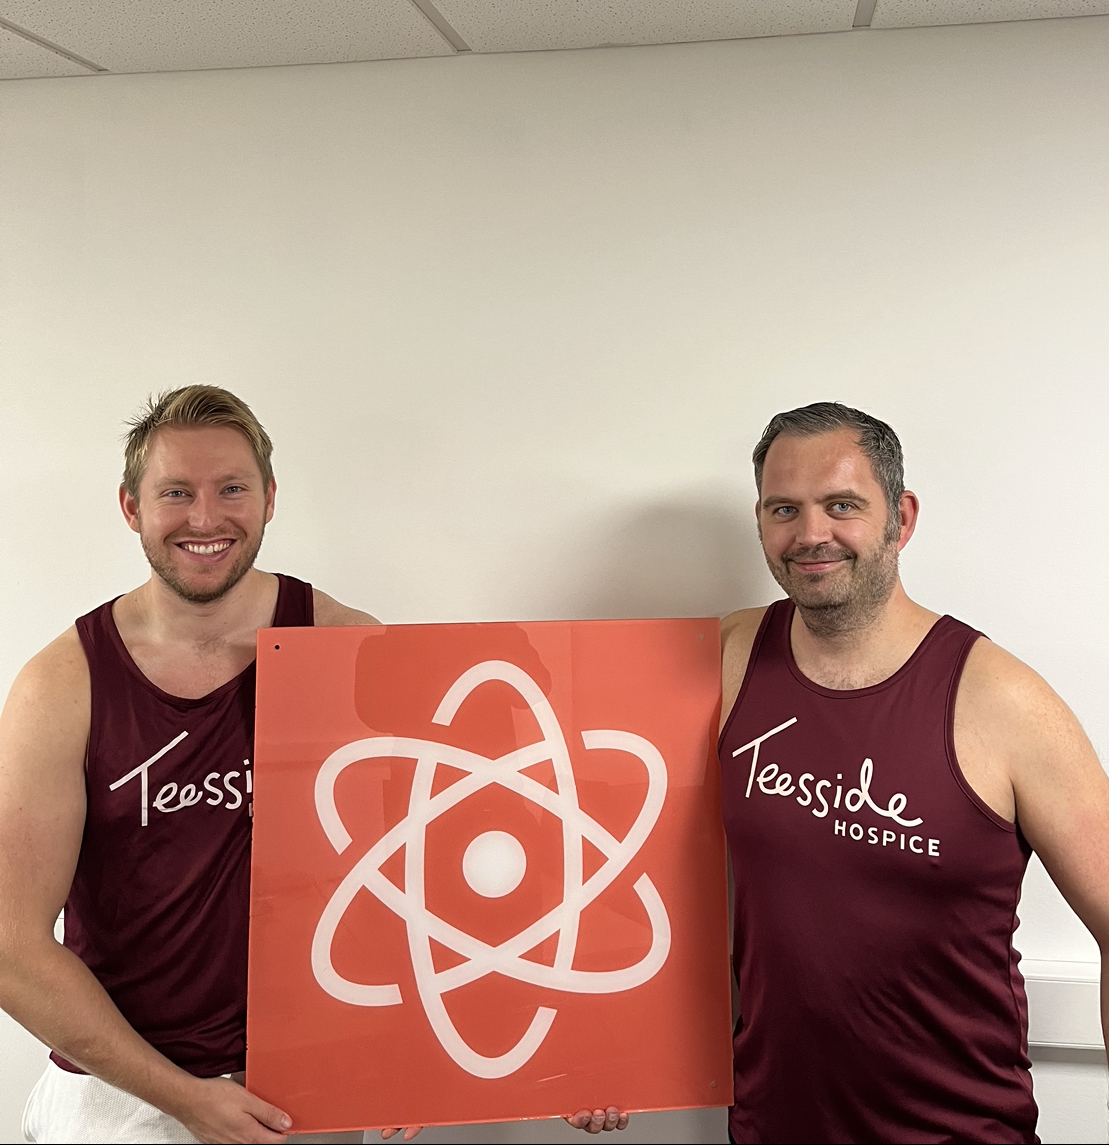 This year Matt and Nathan from our team will be representing Atom Financial in the Great North Run to raise funding for @TeessideHospice! The event is just three weeks away, find out more about this great cause - bit.ly/3qwOqCX #GNR